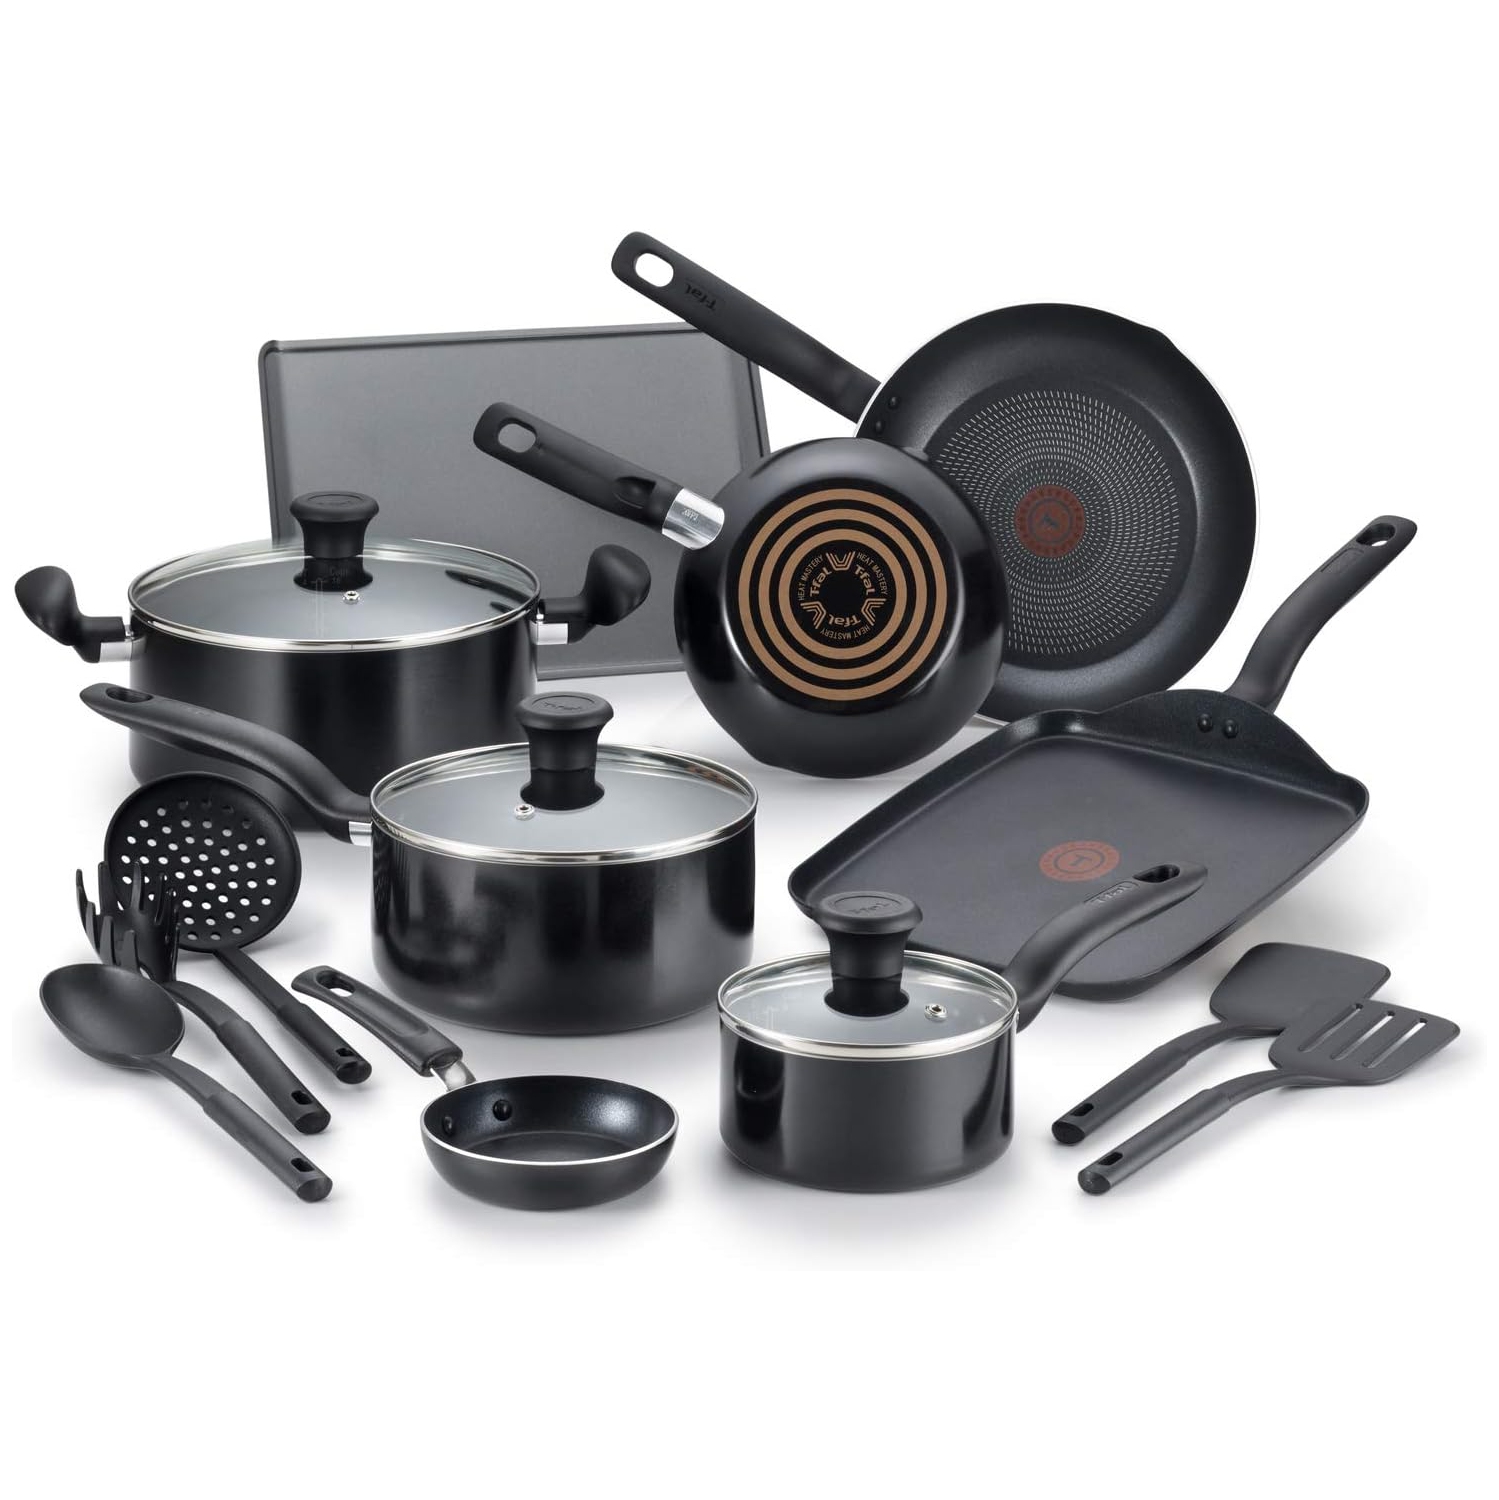 T-Fal Culinaire Non-Stick Aluminum, 16 Piece Pots and Pans Cookware Set, Dishwasher & Oven Safe, PFOA Free, Stainless